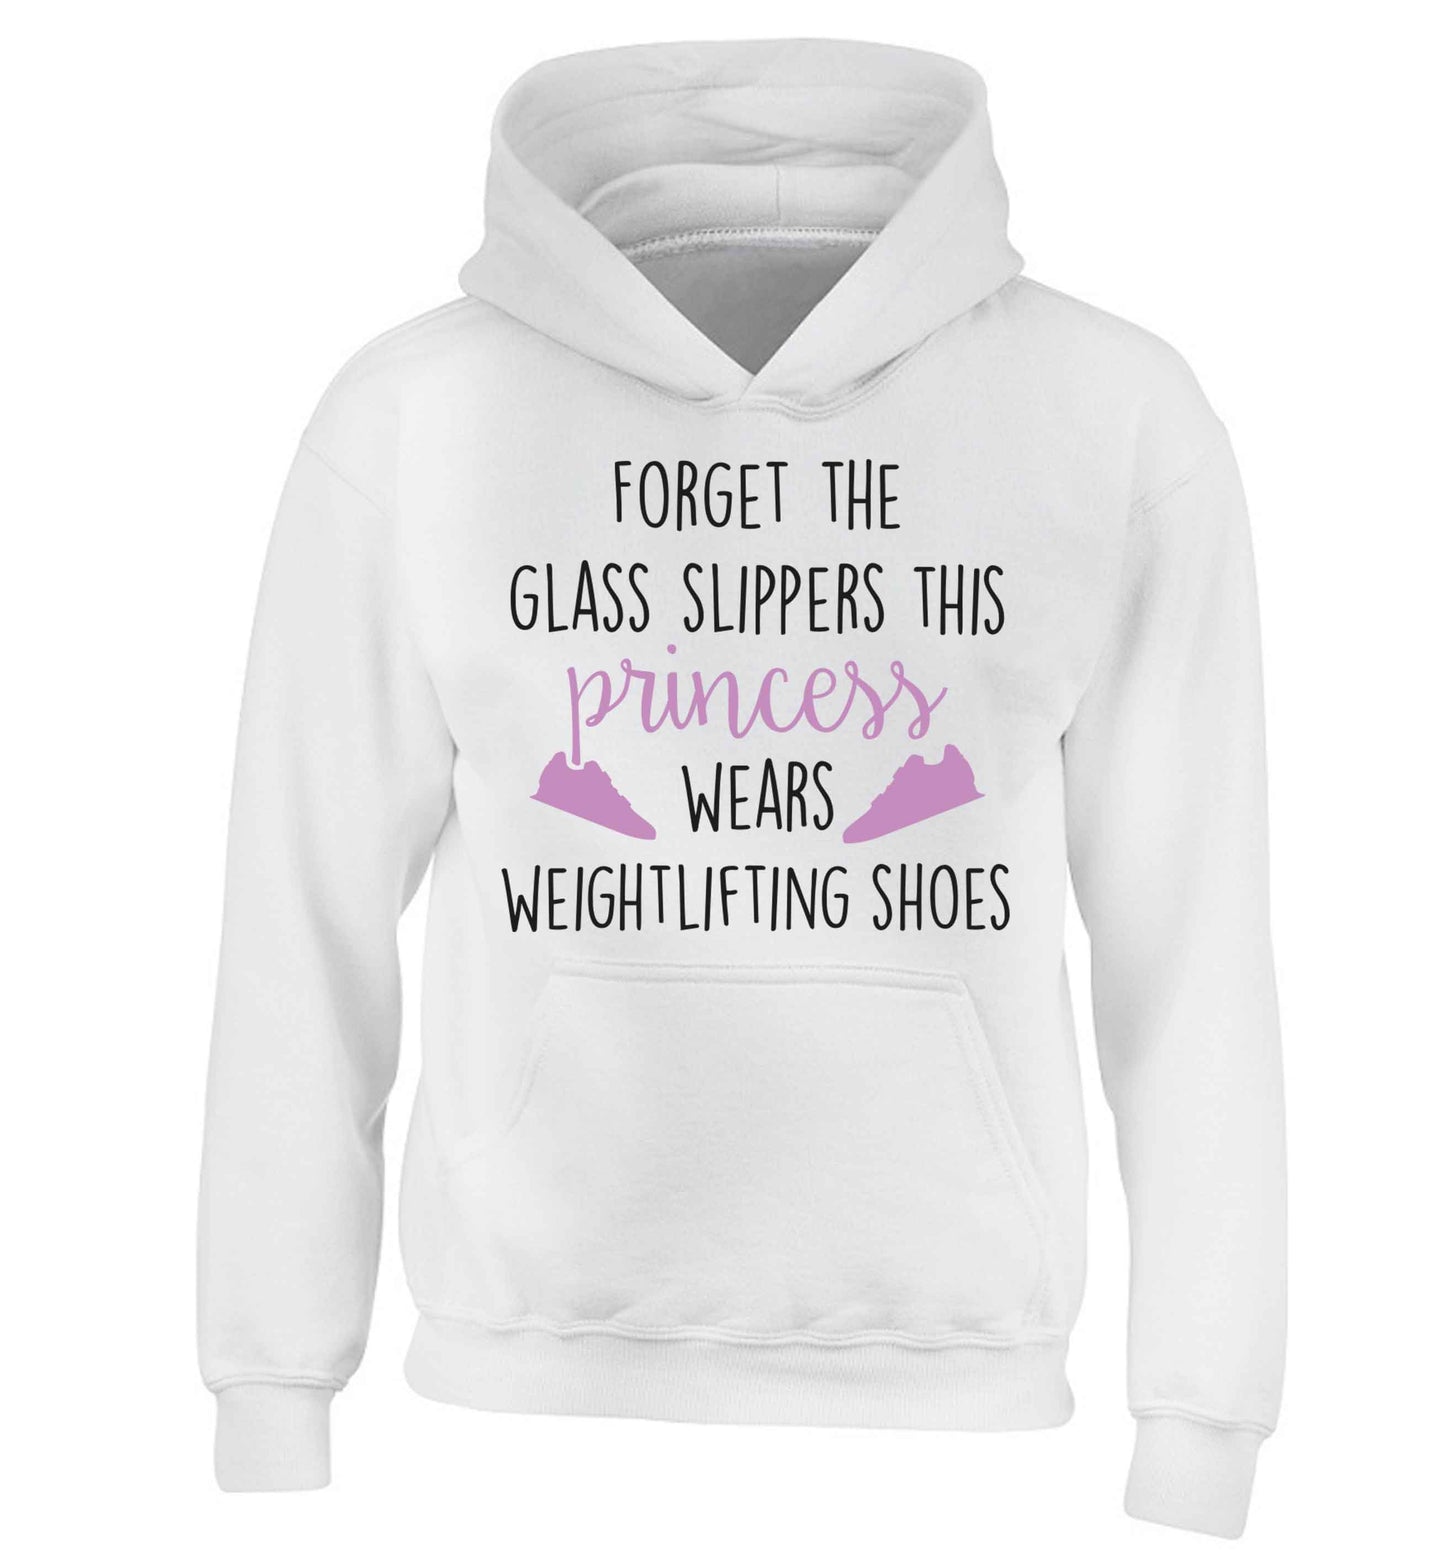 Forget the glass slippers this princess wears weightlifting shoes children's white hoodie 12-13 Years